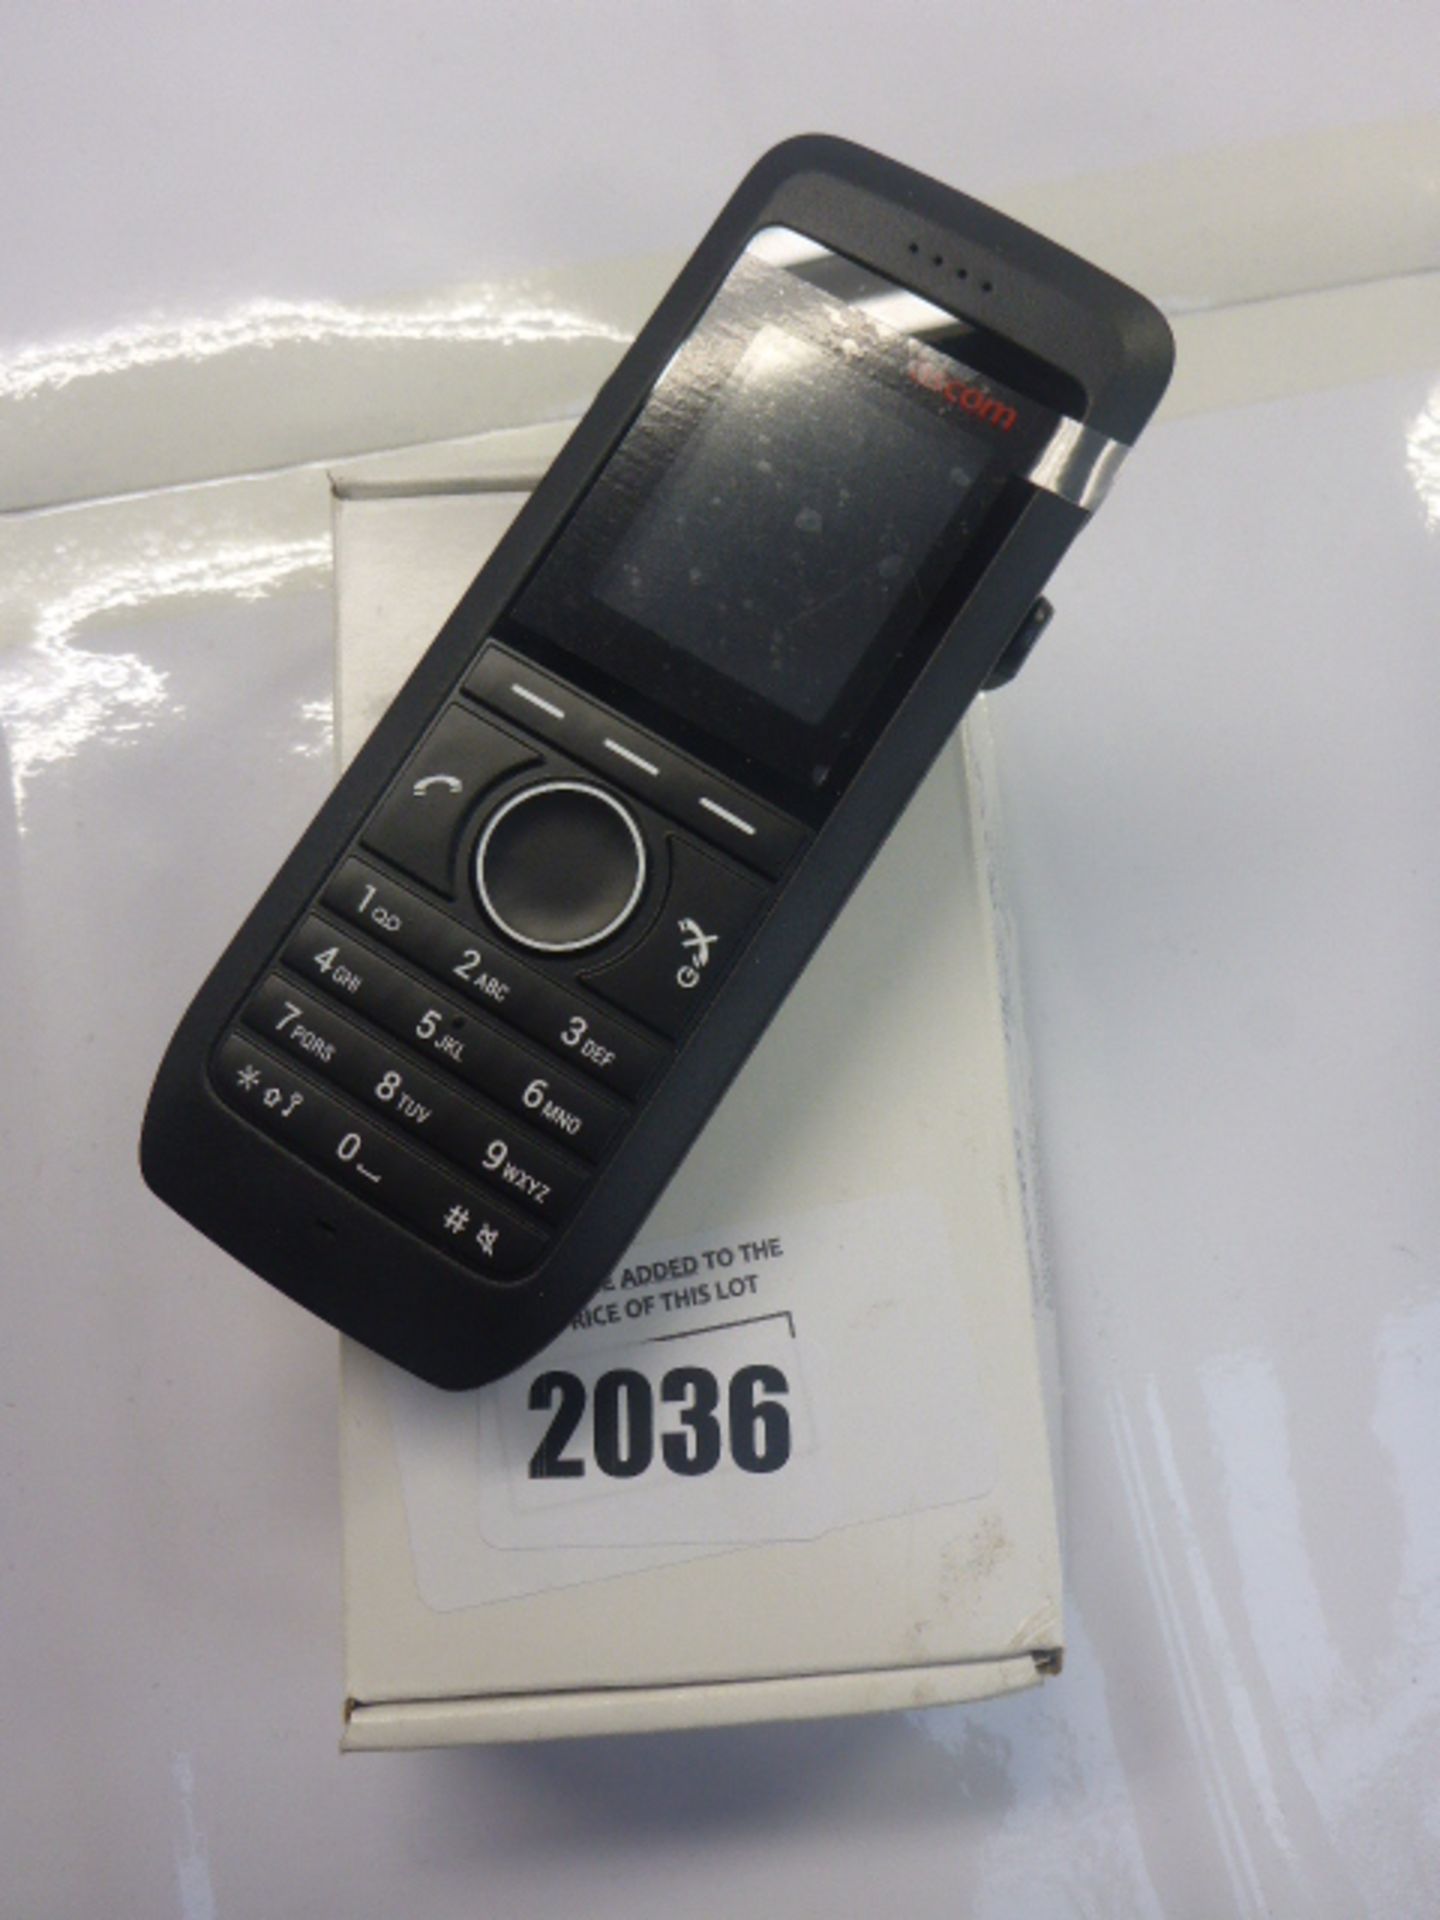 Ascom DH6 Mobile phone with box